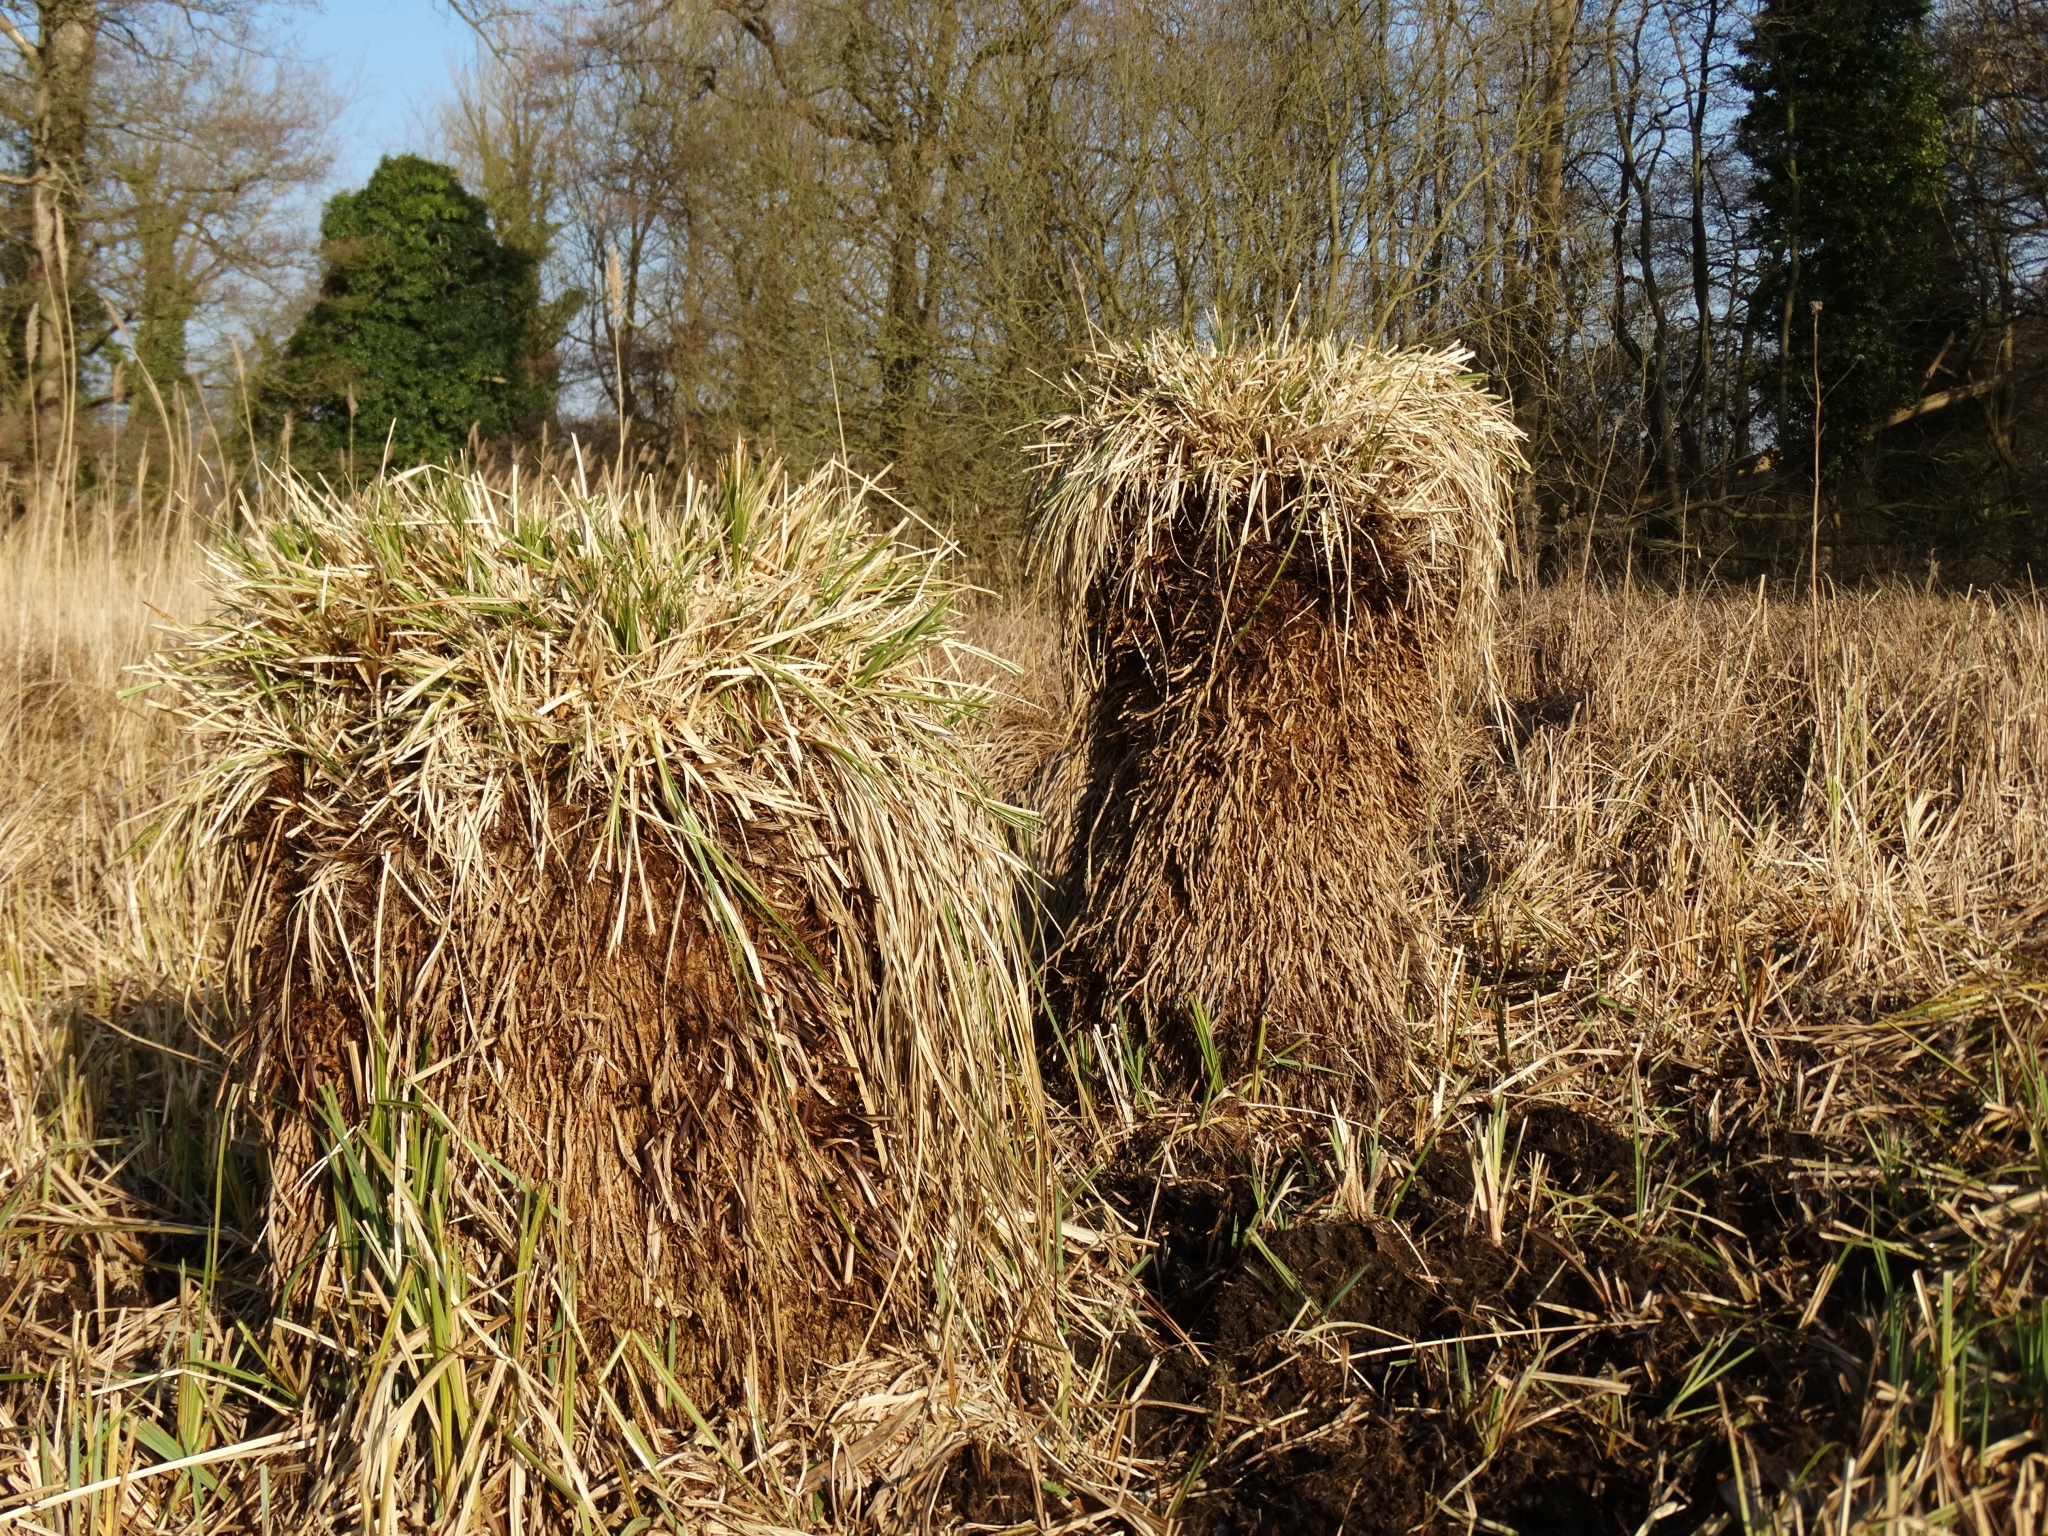 A photo from the FoTF Conservation Event - February 2019 - Encroaching Willow clearance at the Float Meadow at Lynford : Structures on the meadow